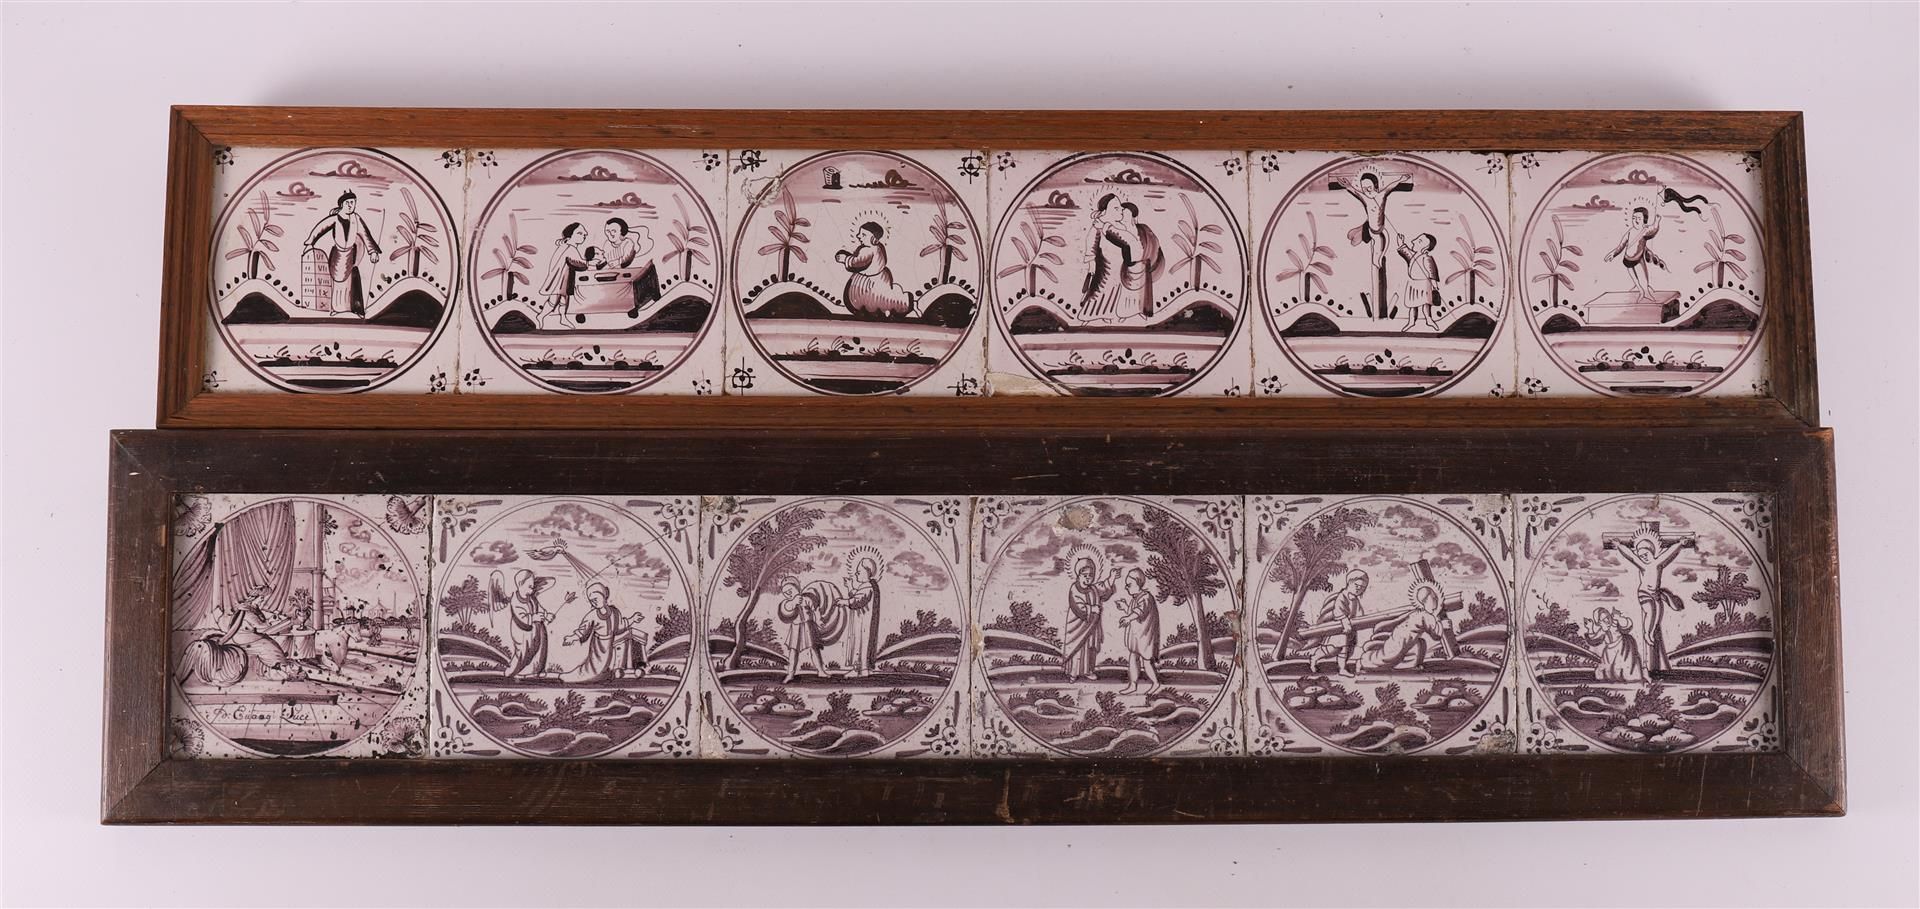 Two tableaus with manganese-colored religious tiles, 18th century.